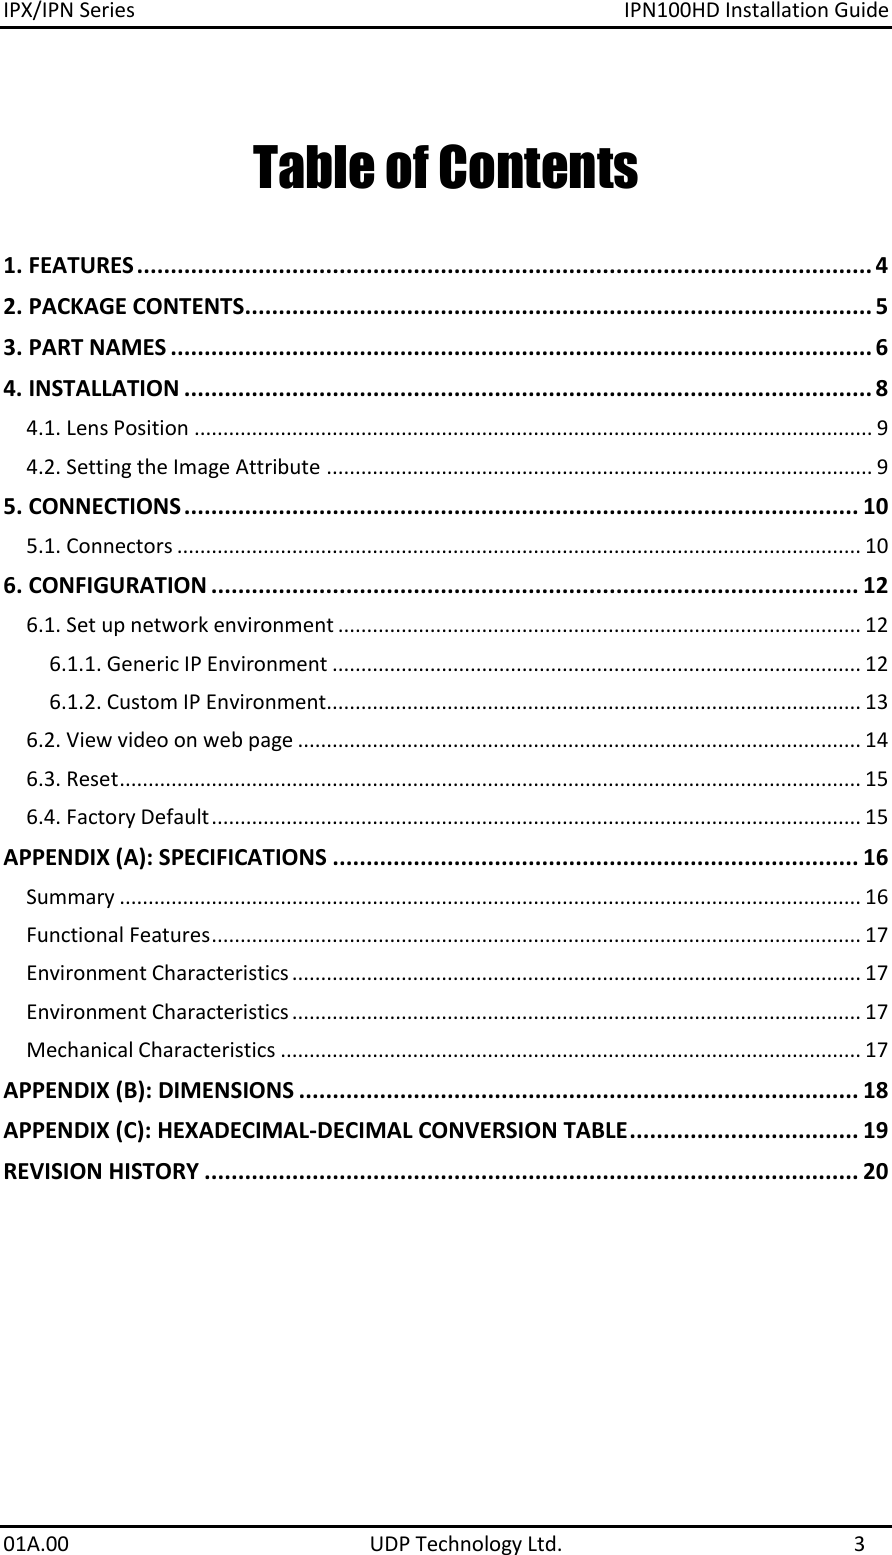 IPX/IPN Series  IPN100HD Installation Guide 01A.00    UDP Technology Ltd.  3 Table of Contents 1. FEATURES ............................................................................................................. 4 2. PACKAGE CONTENTS............................................................................................. 5 3. PART NAMES ........................................................................................................ 6 4. INSTALLATION ...................................................................................................... 8 4.1. Lens Position ...................................................................................................................... 9 4.2. Setting the Image Attribute ............................................................................................... 9 5. CONNECTIONS .................................................................................................... 10 5.1. Connectors ....................................................................................................................... 10 6. CONFIGURATION ................................................................................................ 12 6.1. Set up network environment ........................................................................................... 12 6.1.1. Generic IP Environment ............................................................................................ 12 6.1.2. Custom IP Environment............................................................................................. 13 6.2. View video on web page .................................................................................................. 14 6.3. Reset ................................................................................................................................. 15 6.4. Factory Default ................................................................................................................. 15 APPENDIX (A): SPECIFICATIONS .............................................................................. 16 Summary ................................................................................................................................. 16 Functional Features ................................................................................................................. 17 Environment Characteristics ................................................................................................... 17 Environment Characteristics ................................................................................................... 17 Mechanical Characteristics ..................................................................................................... 17 APPENDIX (B): DIMENSIONS ................................................................................... 18 APPENDIX (C): HEXADECIMAL-DECIMAL CONVERSION TABLE .................................. 19 REVISION HISTORY ................................................................................................. 20 